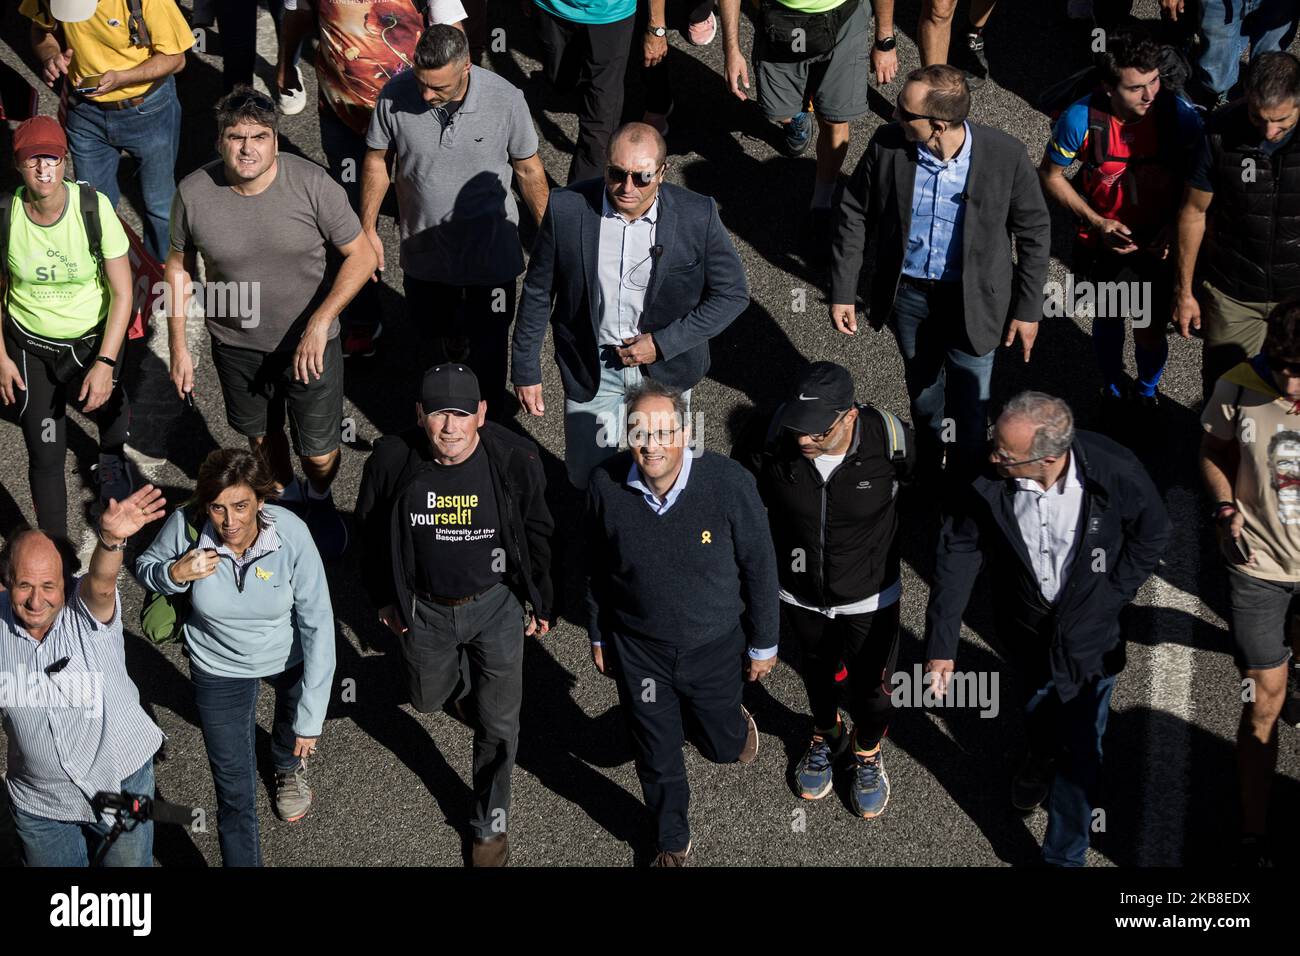 Juan Jose Ibarretxe, Joaquim Torra during a protest in Barcelona, Spain, on October 16, 2019, a day after police arrested 51 people across Catalonia overnight after violent protests over the jailing of nine separatist leaders for their role in a failed 2017 independence bid. Pro-independence groups staged sit-ins outside Spanish government offices in a number of Catalan cities late Tuesday, with around 40,000 people taking part in Barcelona and 9,000 in the separatist stronghold of Girona, according to police. (Photo by Carles Palacio/NurPhoto) Stock Photo